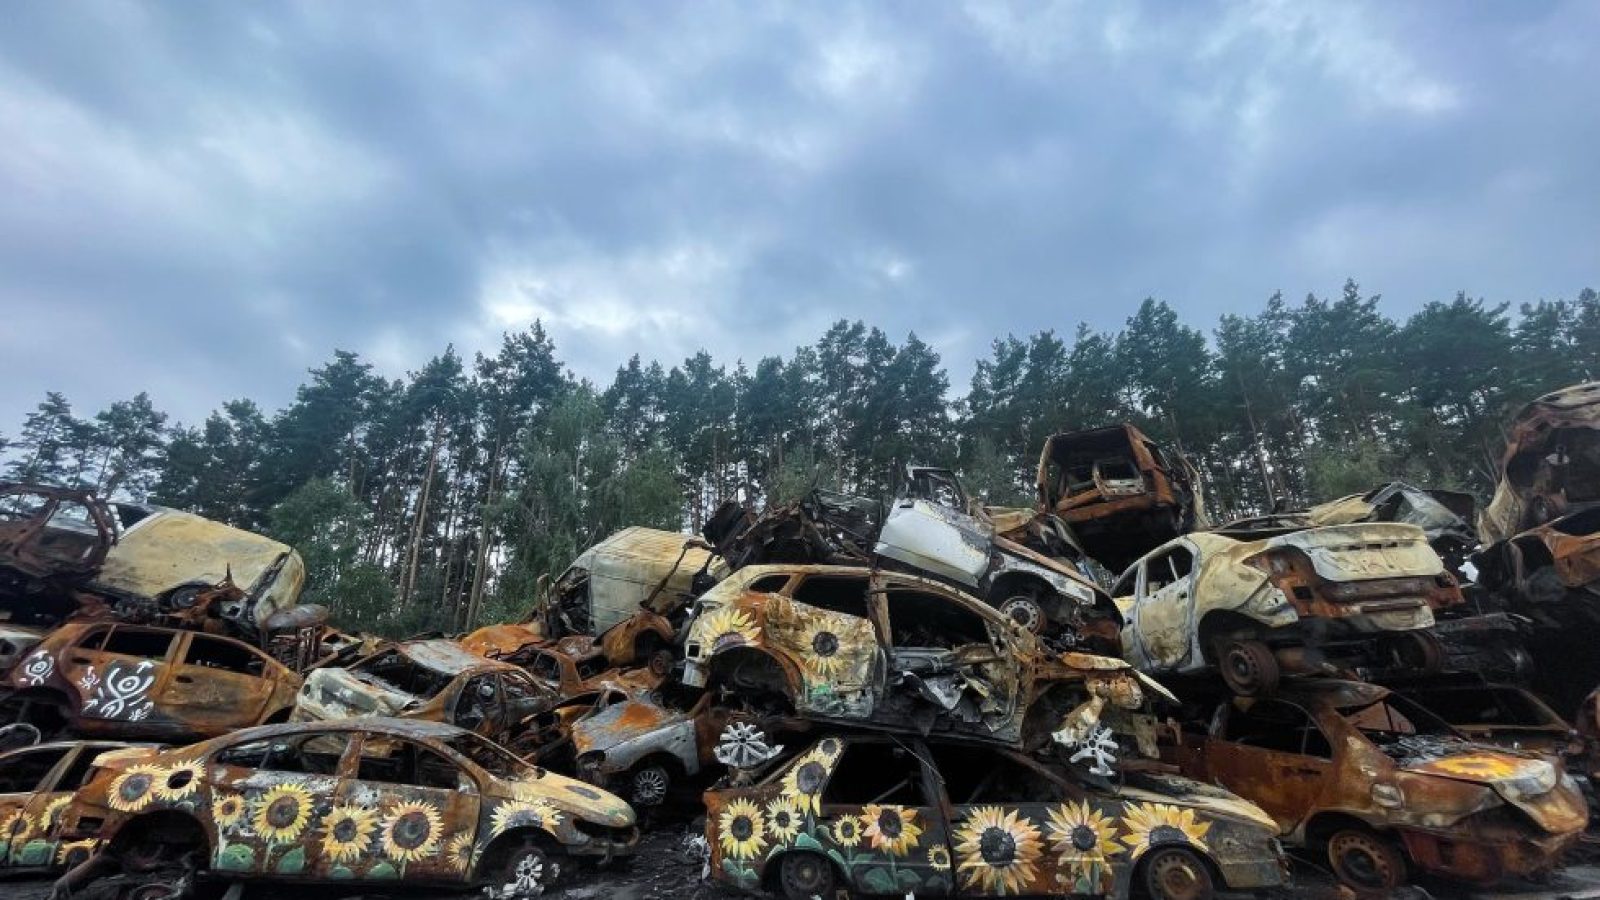 Sunflowers painted on piled up old cars